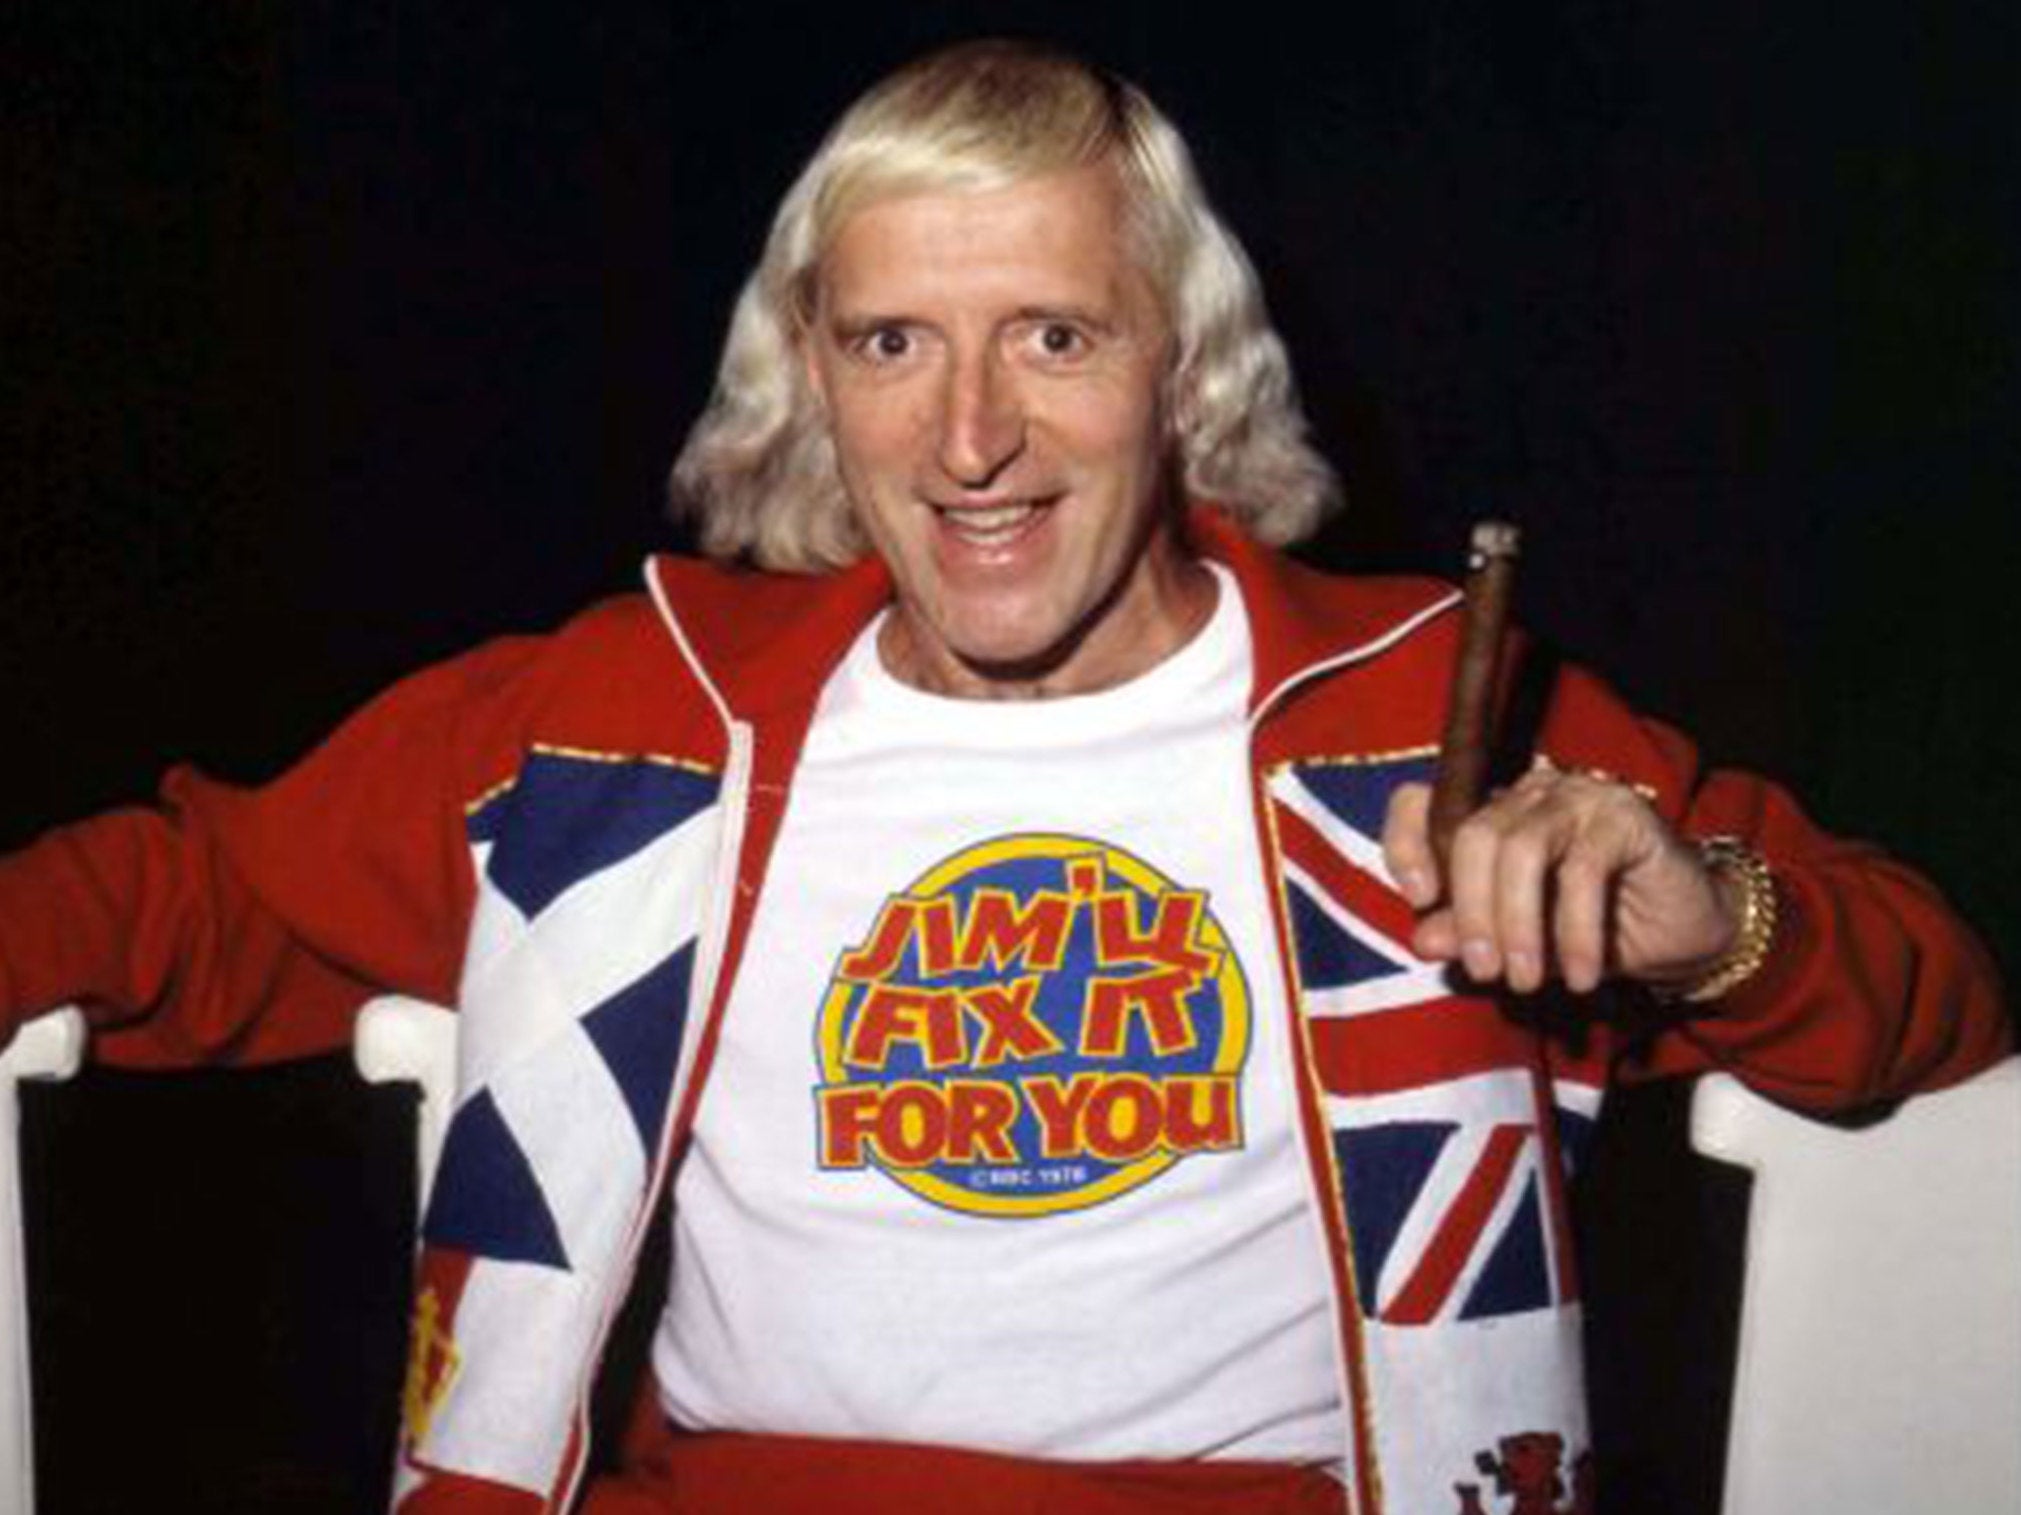 After his death in 2011, it emerged that Savile was a prolific paedophile and sexual abuser